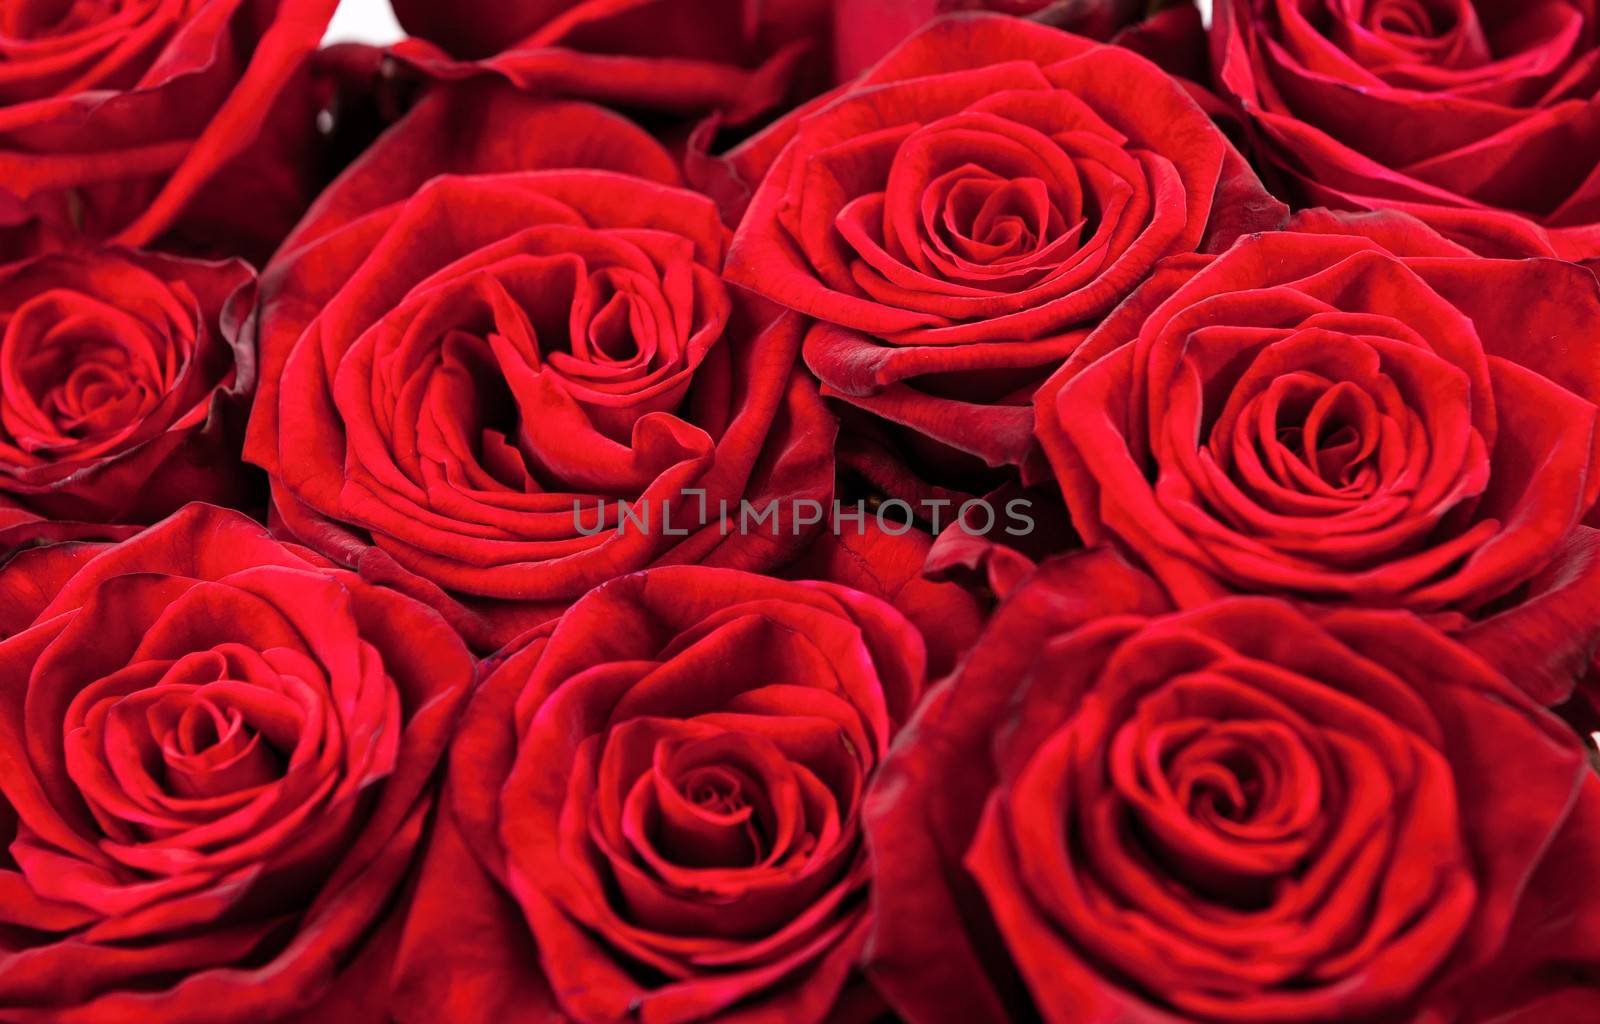 Background of red roses by photobac